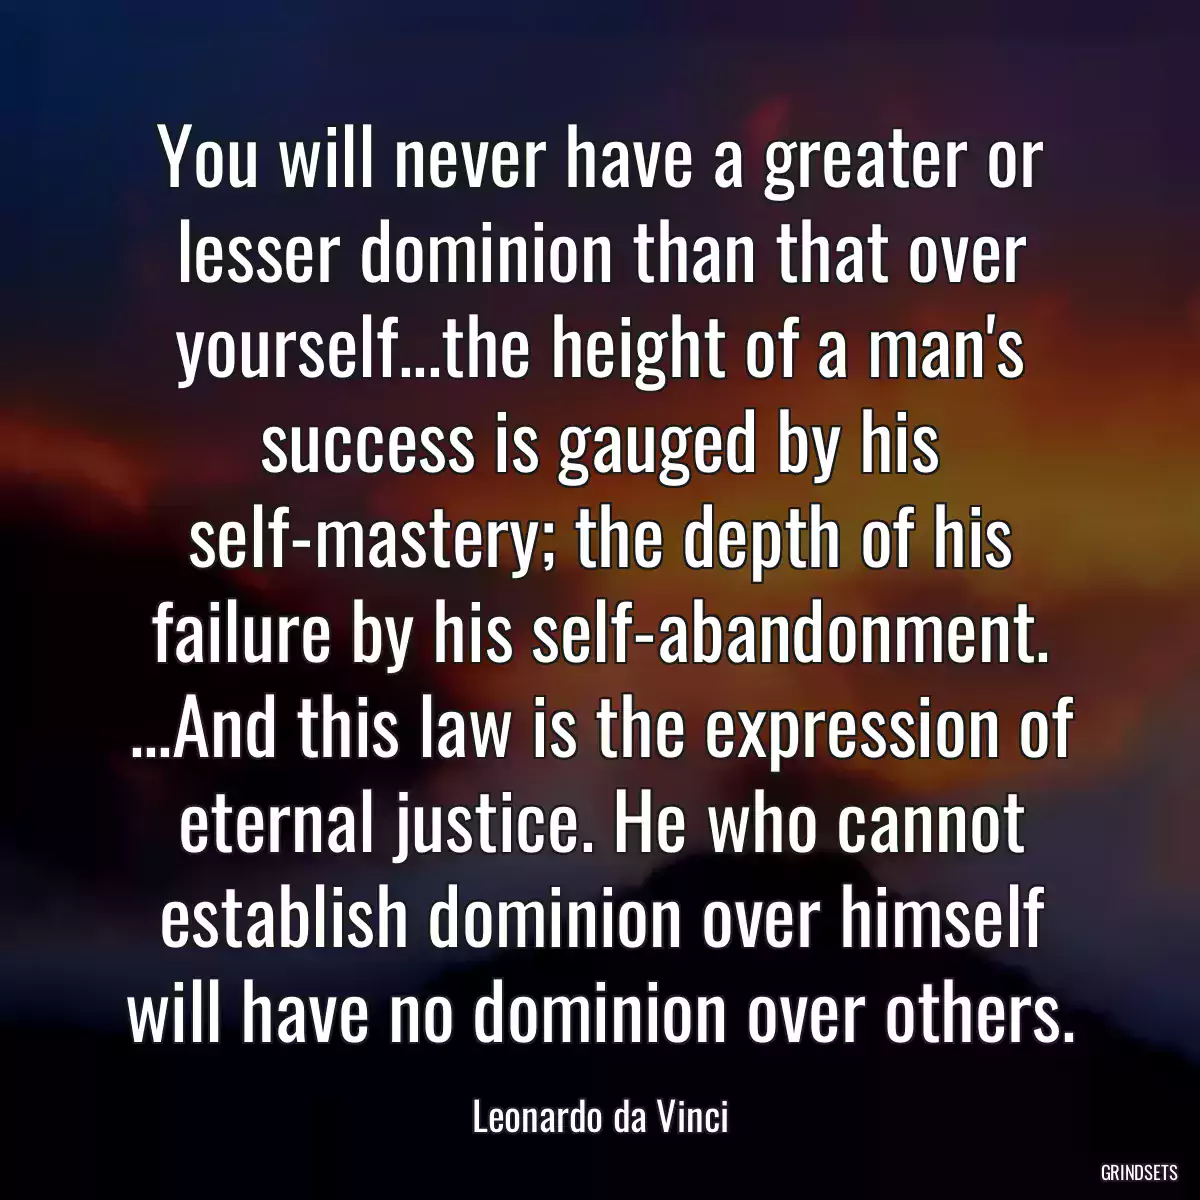 You will never have a greater or lesser dominion than that over yourself...the height of a man\'s success is gauged by his self-mastery; the depth of his failure by his self-abandonment. ...And this law is the expression of eternal justice. He who cannot establish dominion over himself will have no dominion over others.